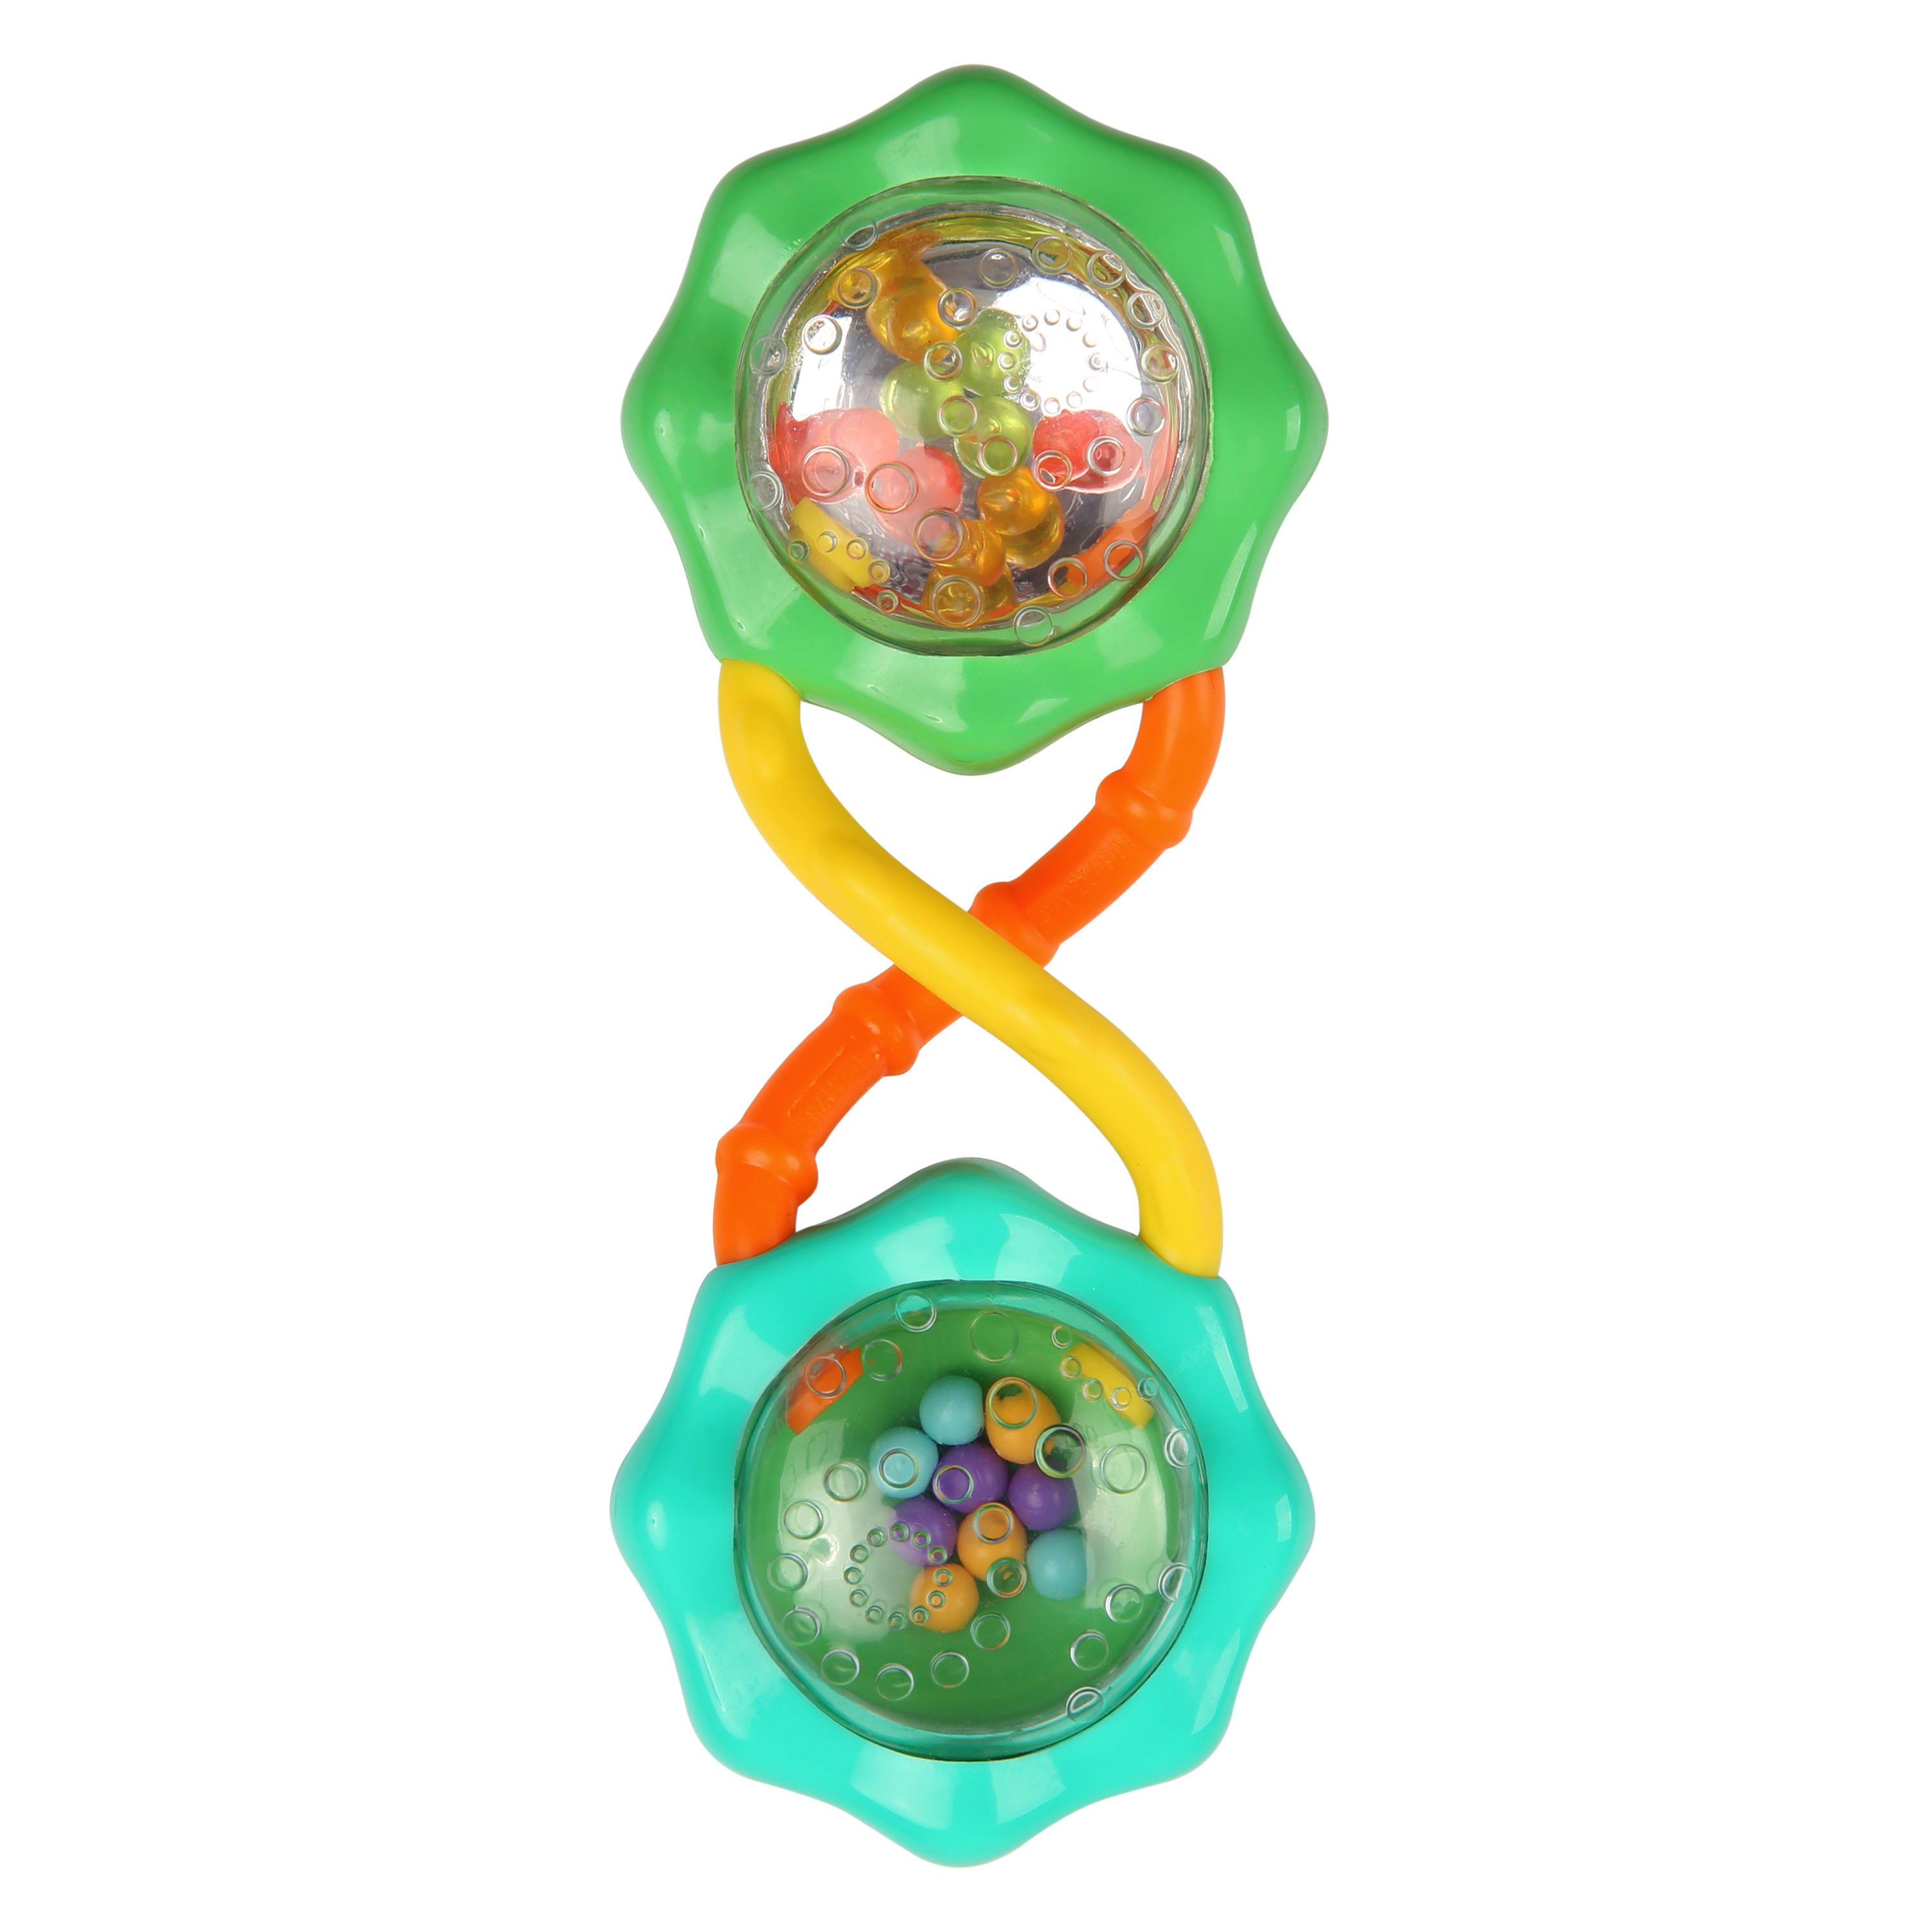 Bright Starts Rattle & Shake BPA-Free Baby Barbell Toy, Green, Ages Newborn+ - image 1 of 7